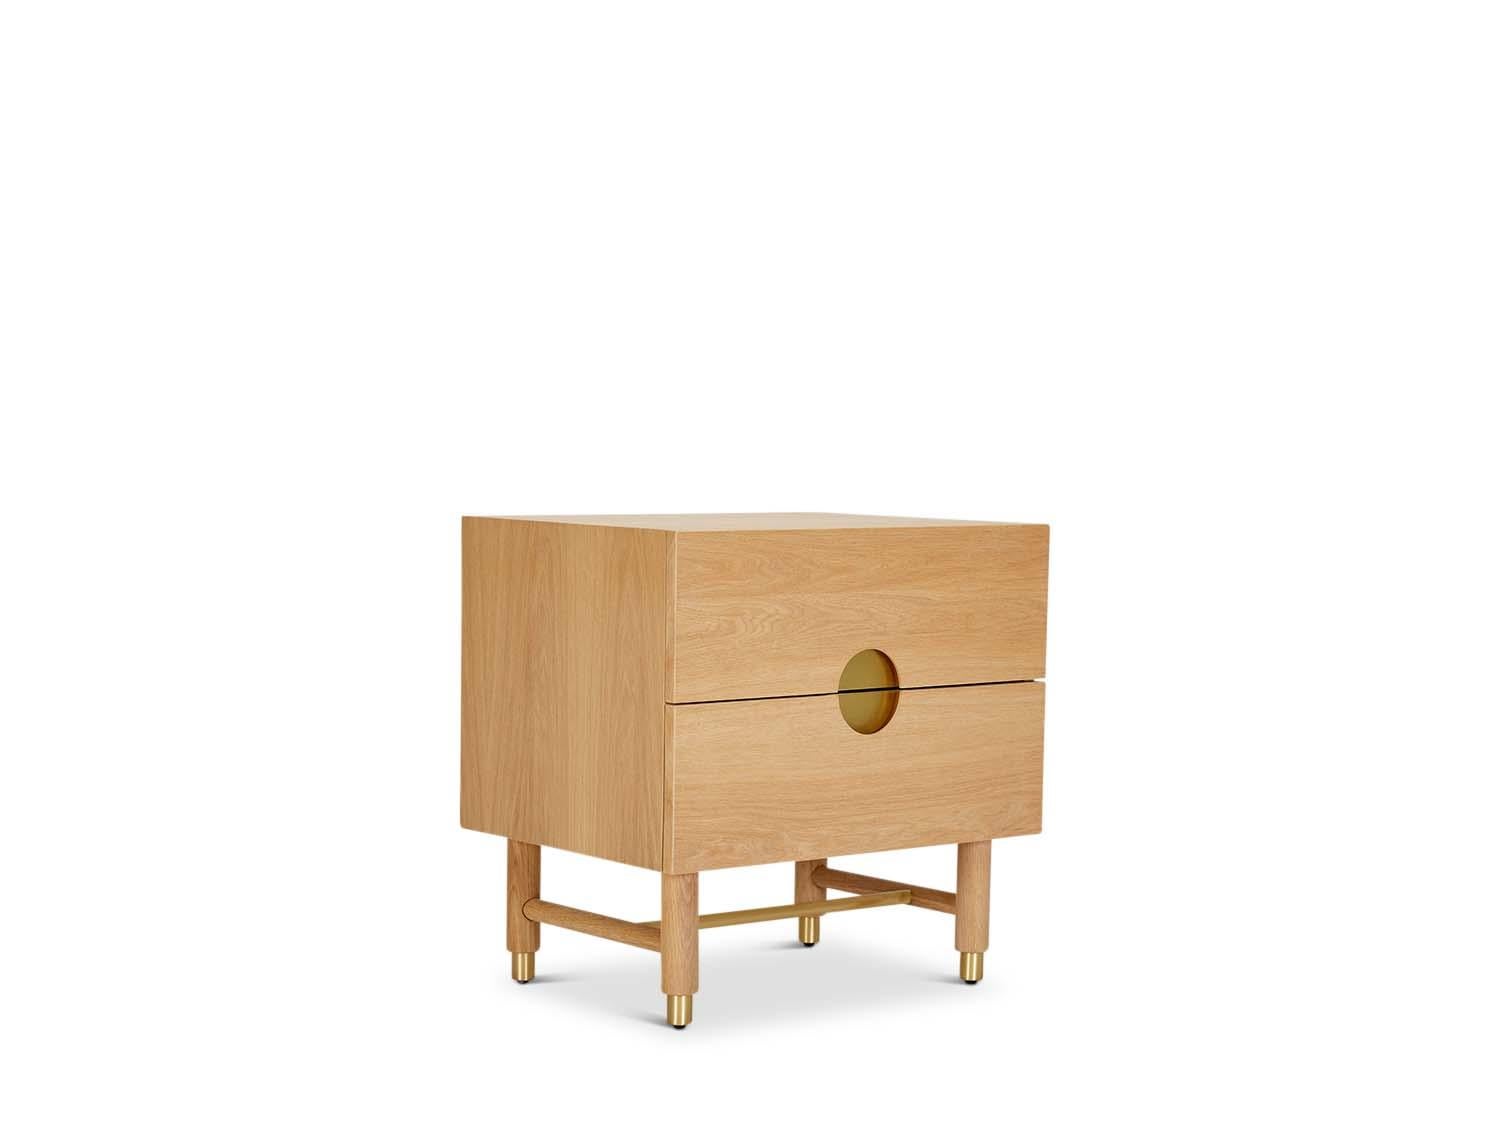 The Niguel nightstand features two drawers. Details include leveling brass cap feet, a brass stretcher on the base, lacquered interior and inset brass hardware. 

The Lawson-Fenning Collection is designed and handmade in Los Angeles, California.